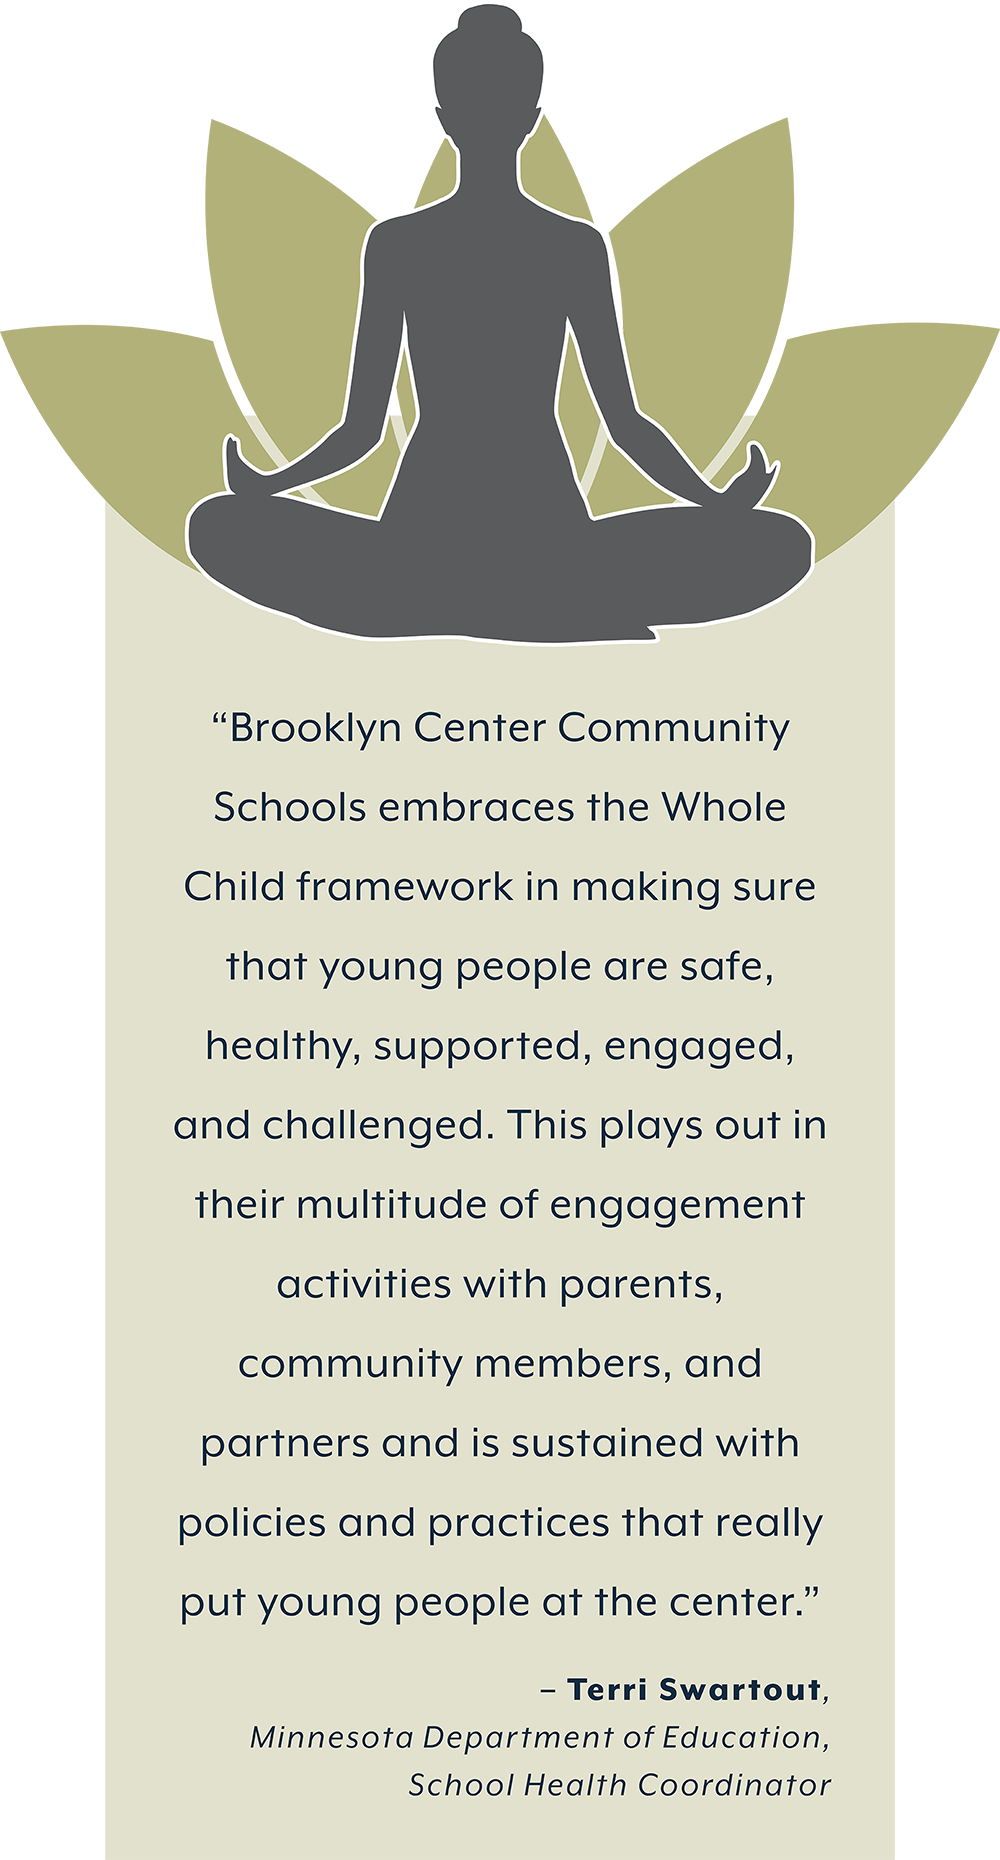 Zen image and quote. “Brooklyn Center Community  Schools embraces the Whole  Child framework in making sure  that young people are safe,  healthy, supported, engaged,  and challenged. This plays out in  their multitude of engagement activities with parents, community members, and  partners and is sustained with  policies and practices that really put young people at the center.”  – Terri Swartout,  Minnesota Department of Education,  School Health Coordinator 